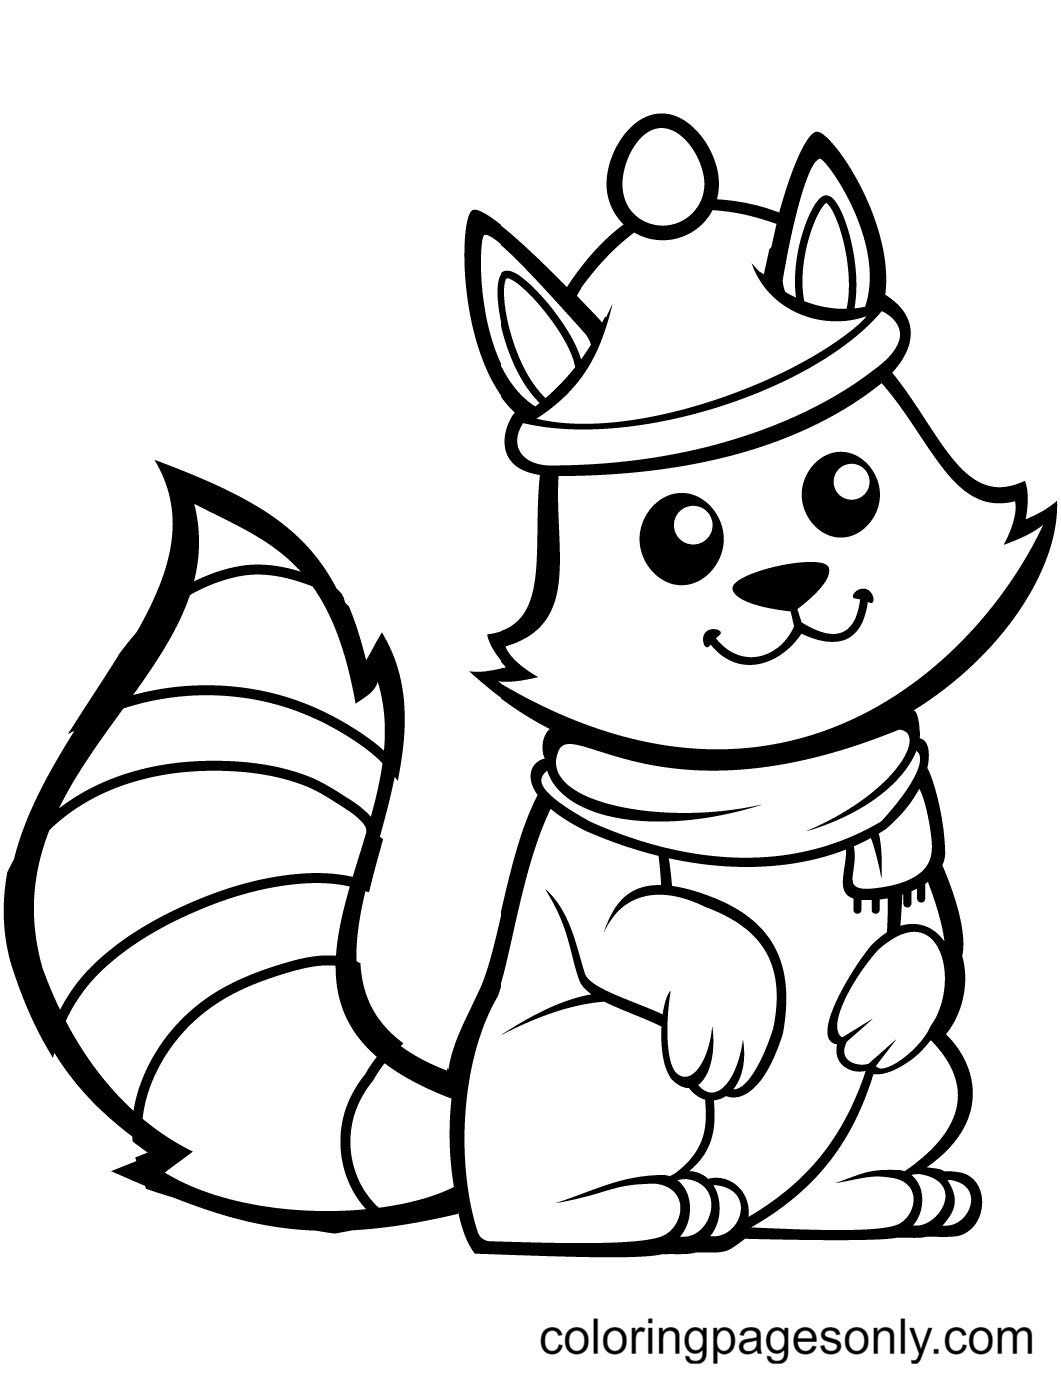 Funny Squirrel in a Hat Coloring Pages